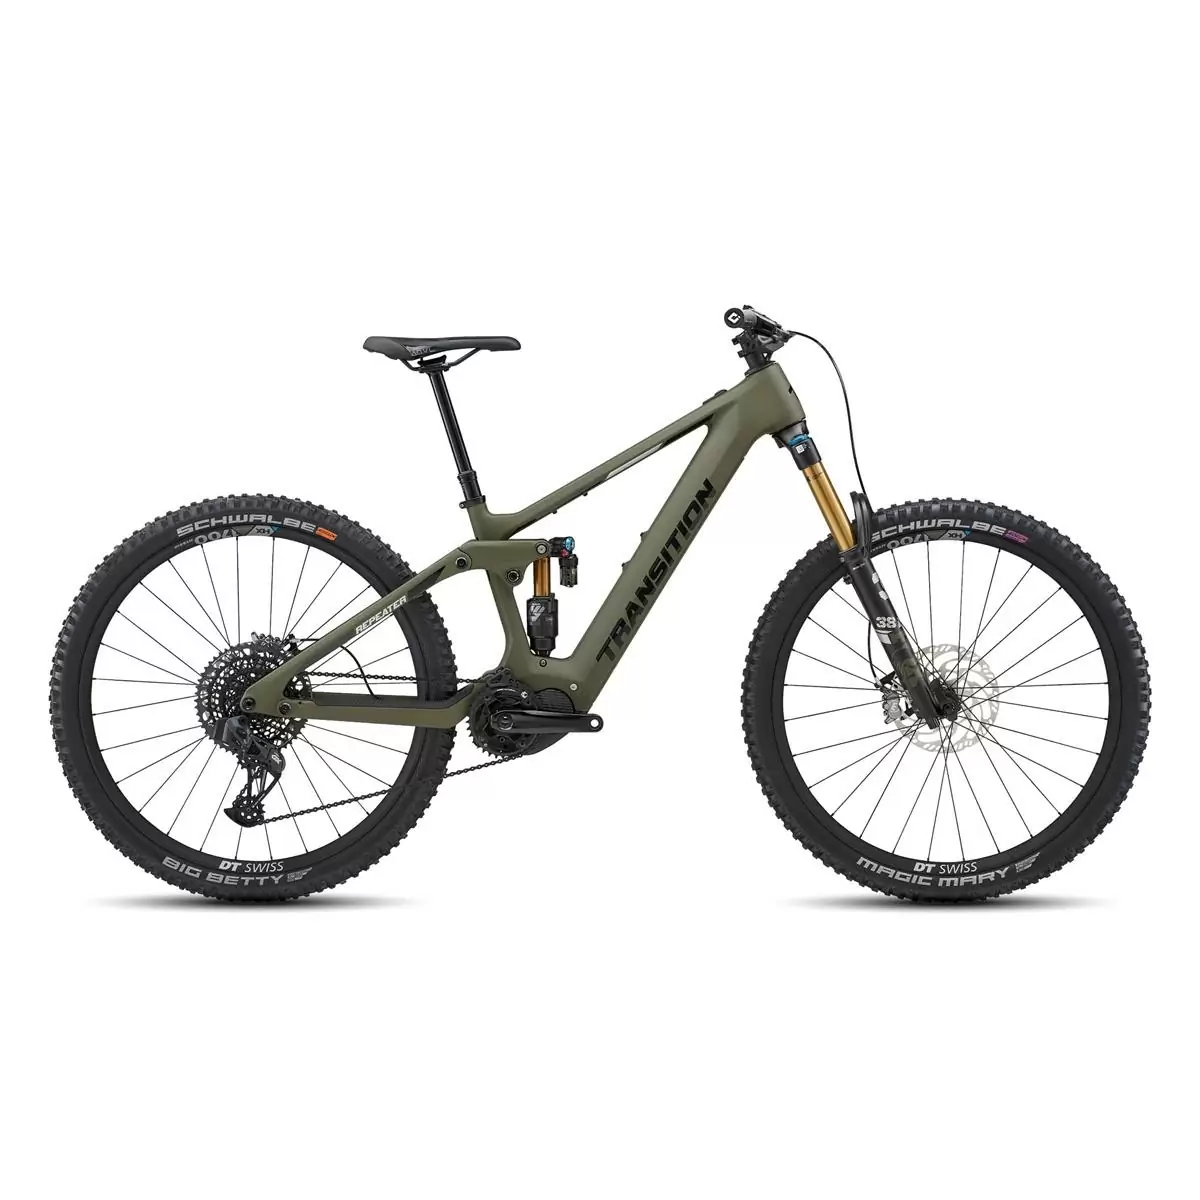 Repeater Carbon AXS 29'' 160mm 12s 630Wh Shimano EP8 Mossy Green Size XL - image